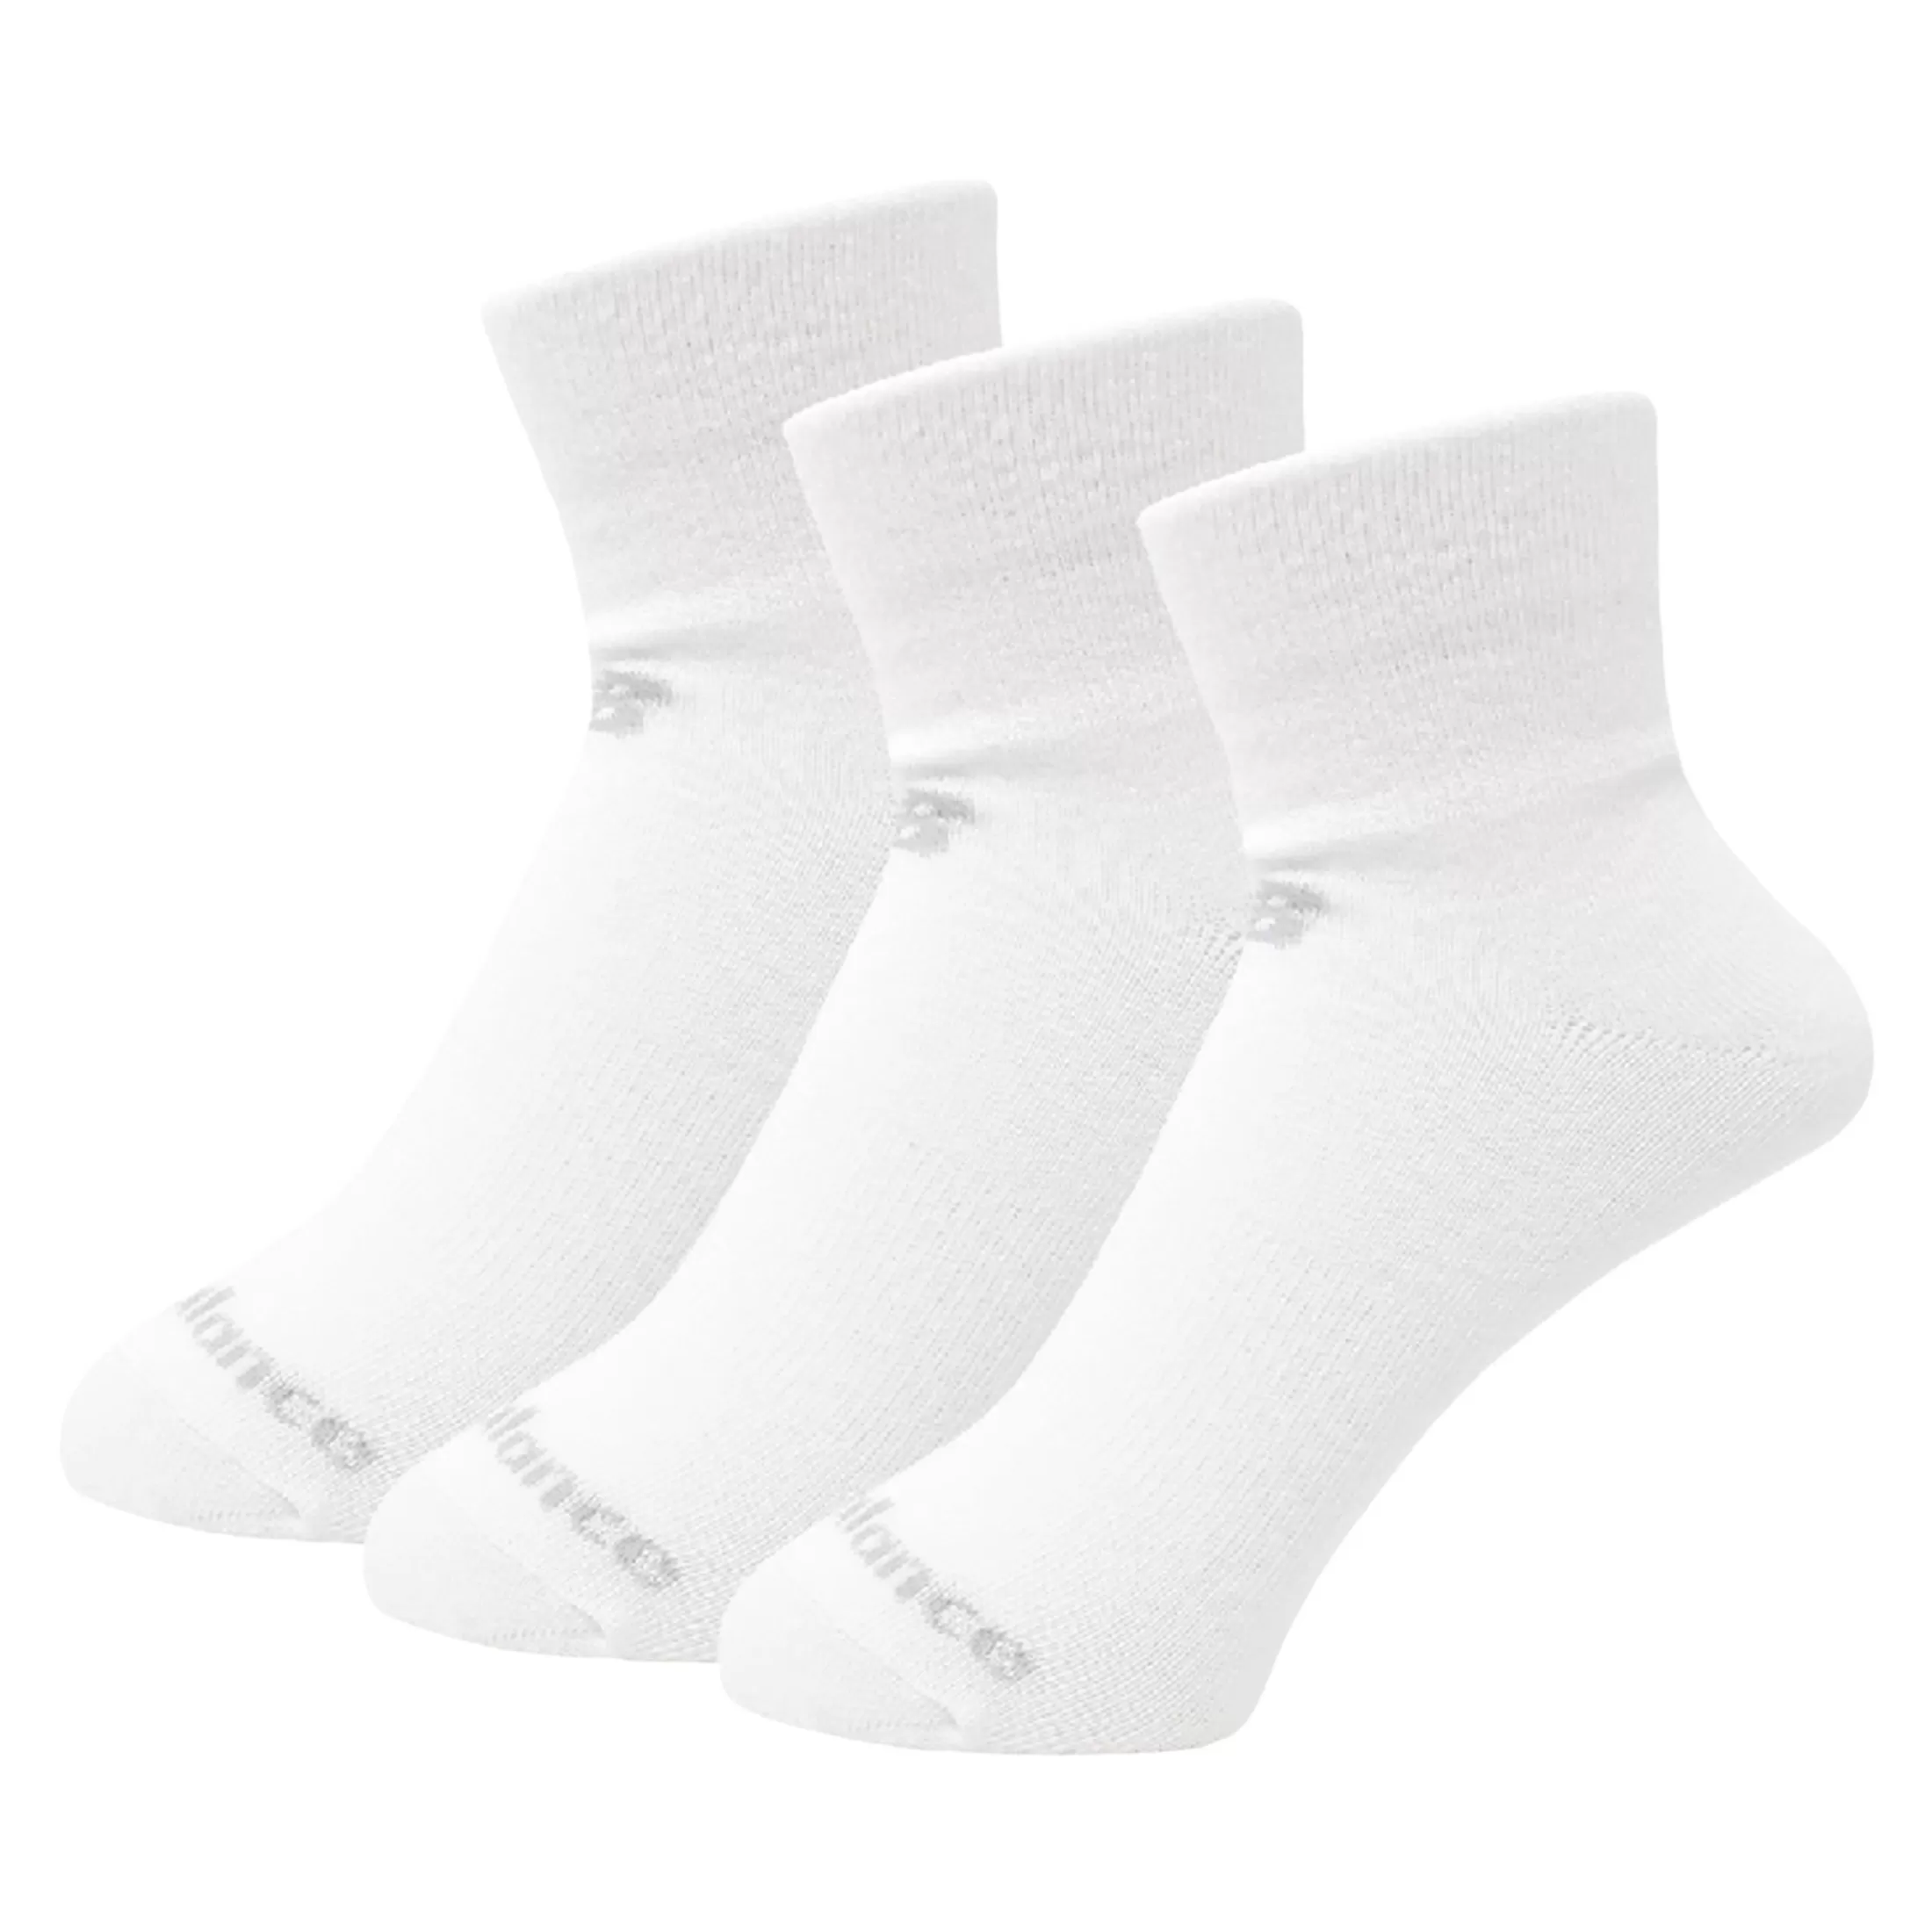 Clearance Unisex Performance Cotton Flat Knit Ankle Socks 3 Pack MULHER/HOMEN Socks | All Accessories